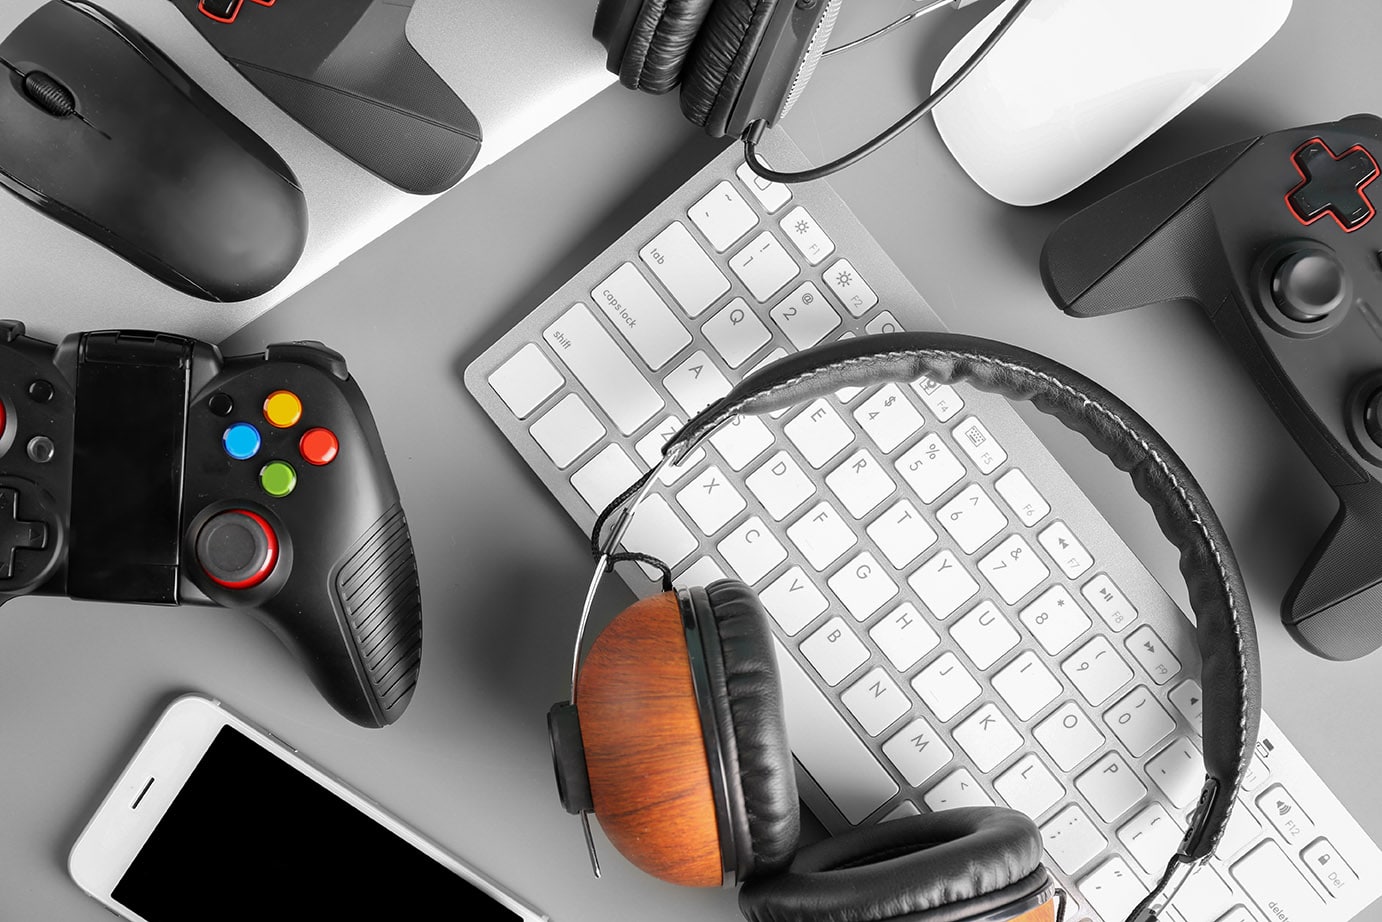 Cultura gamer Gamepads,,Mice,,Headphones,And,Keyboard,On,Table